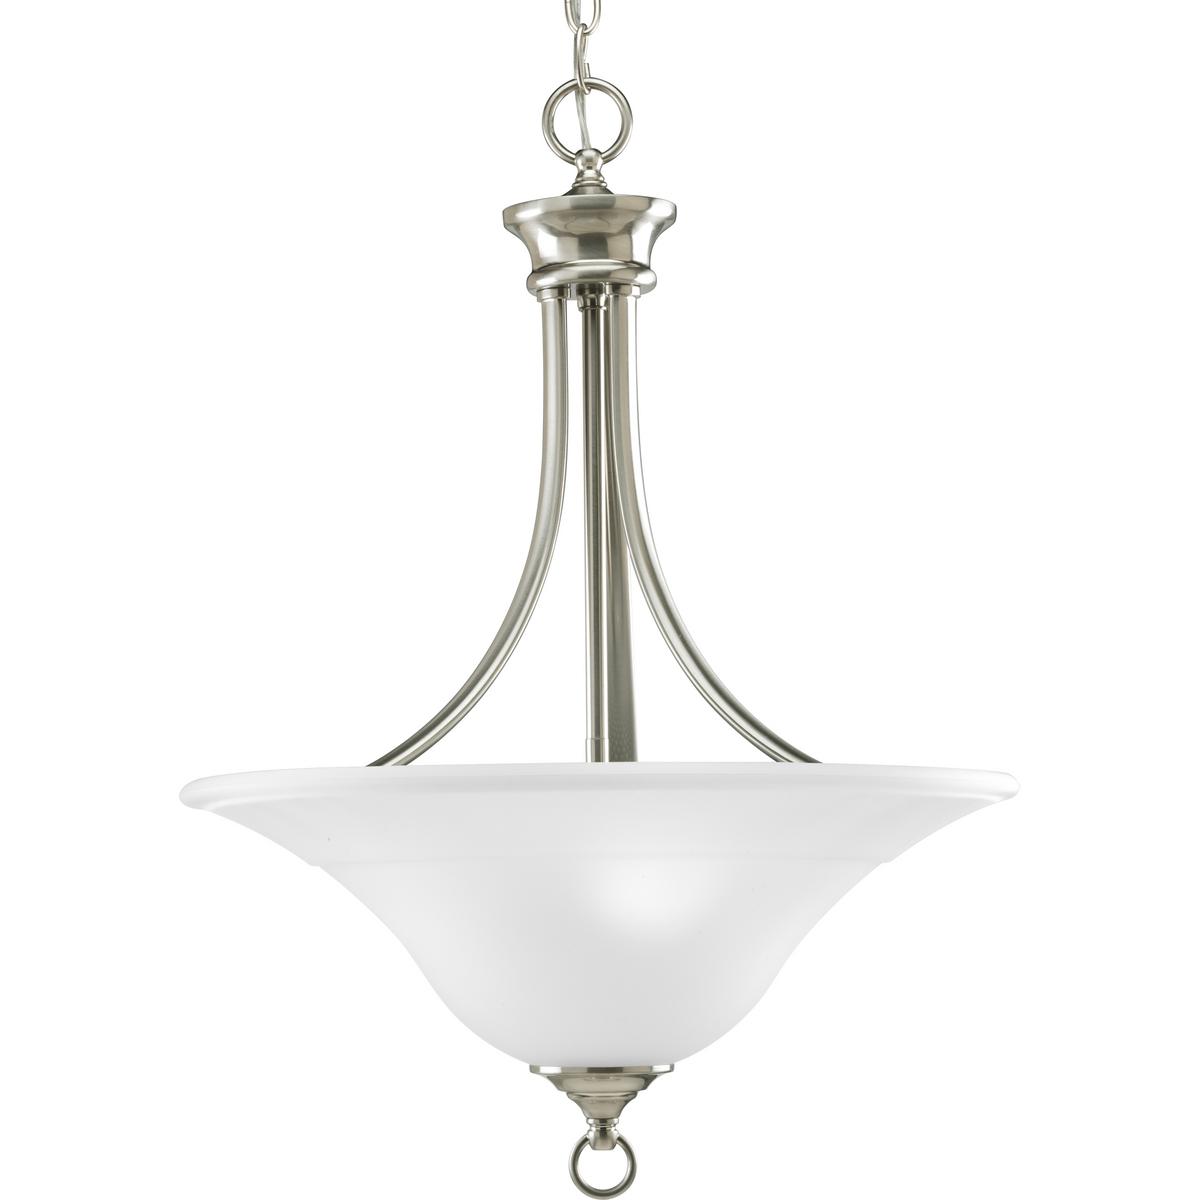 Hubbell P3474-09 Three-light hall and foyer fixture featuring soft angles, curving lines and etched glass shades. Gracefully exotic, the Trinity Collection offers classic sophistication for transitional interiors. Sculptural forms of metal and glass are enhanced by a clas